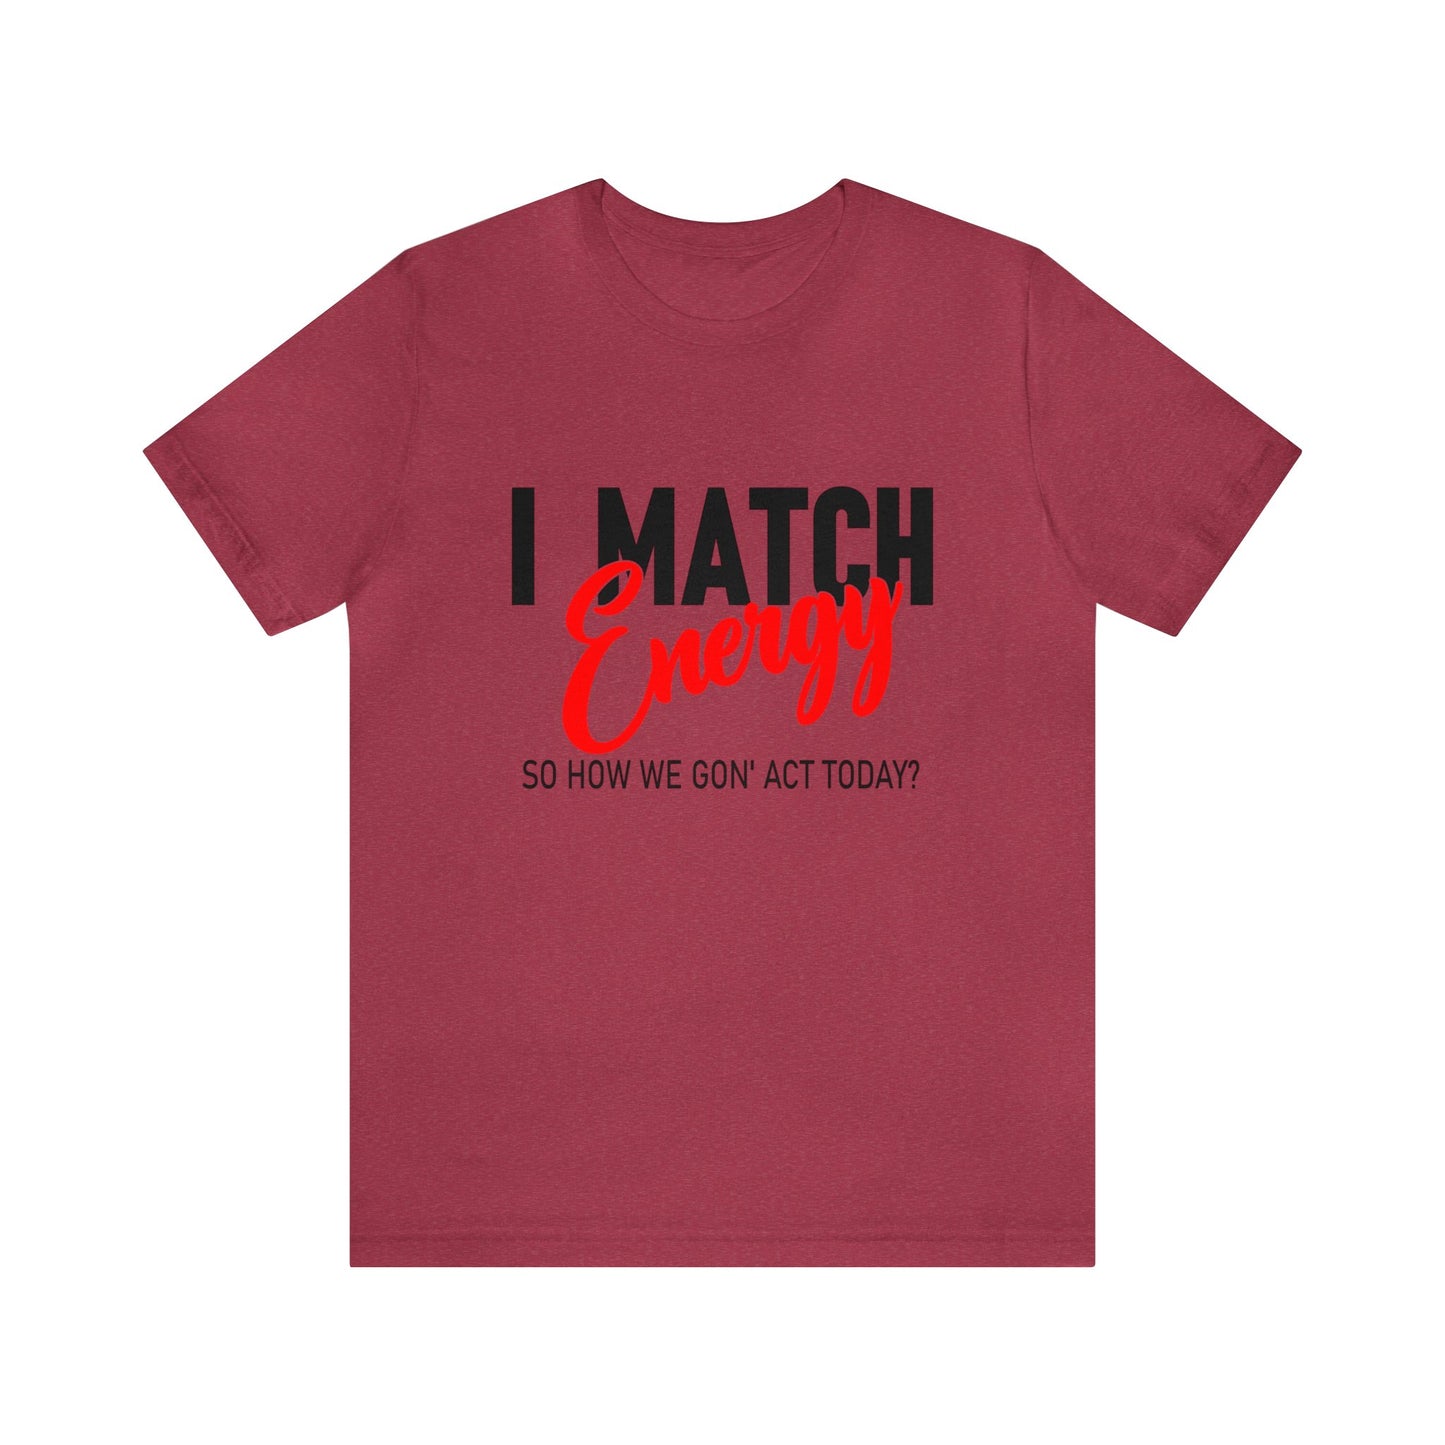 "I match energy, So how we gon' to act today?" Tee